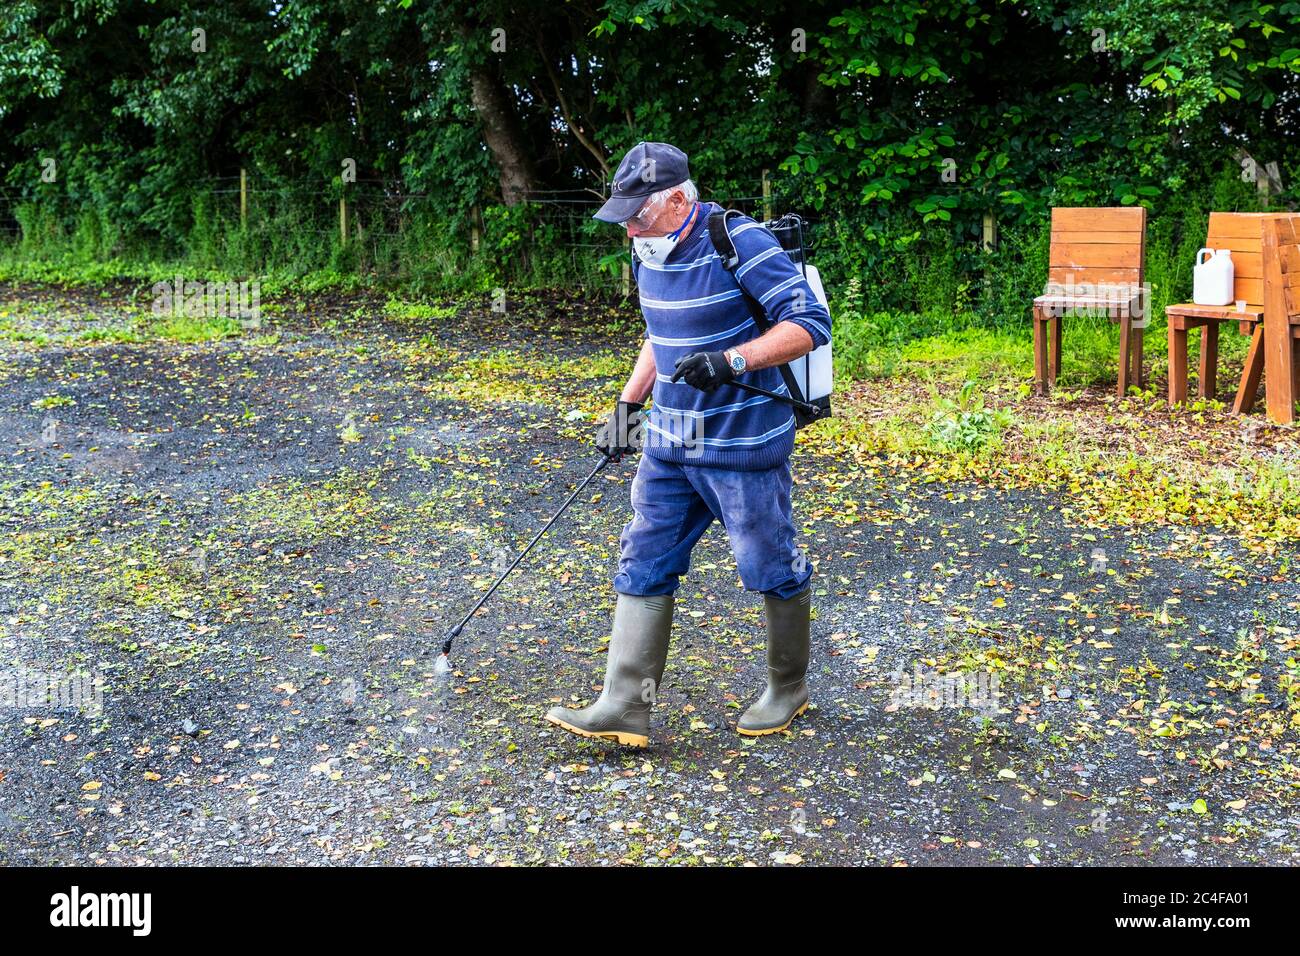 Man spraying weedkiller using a backpack, Allotment, Kilwinning Stock Photo